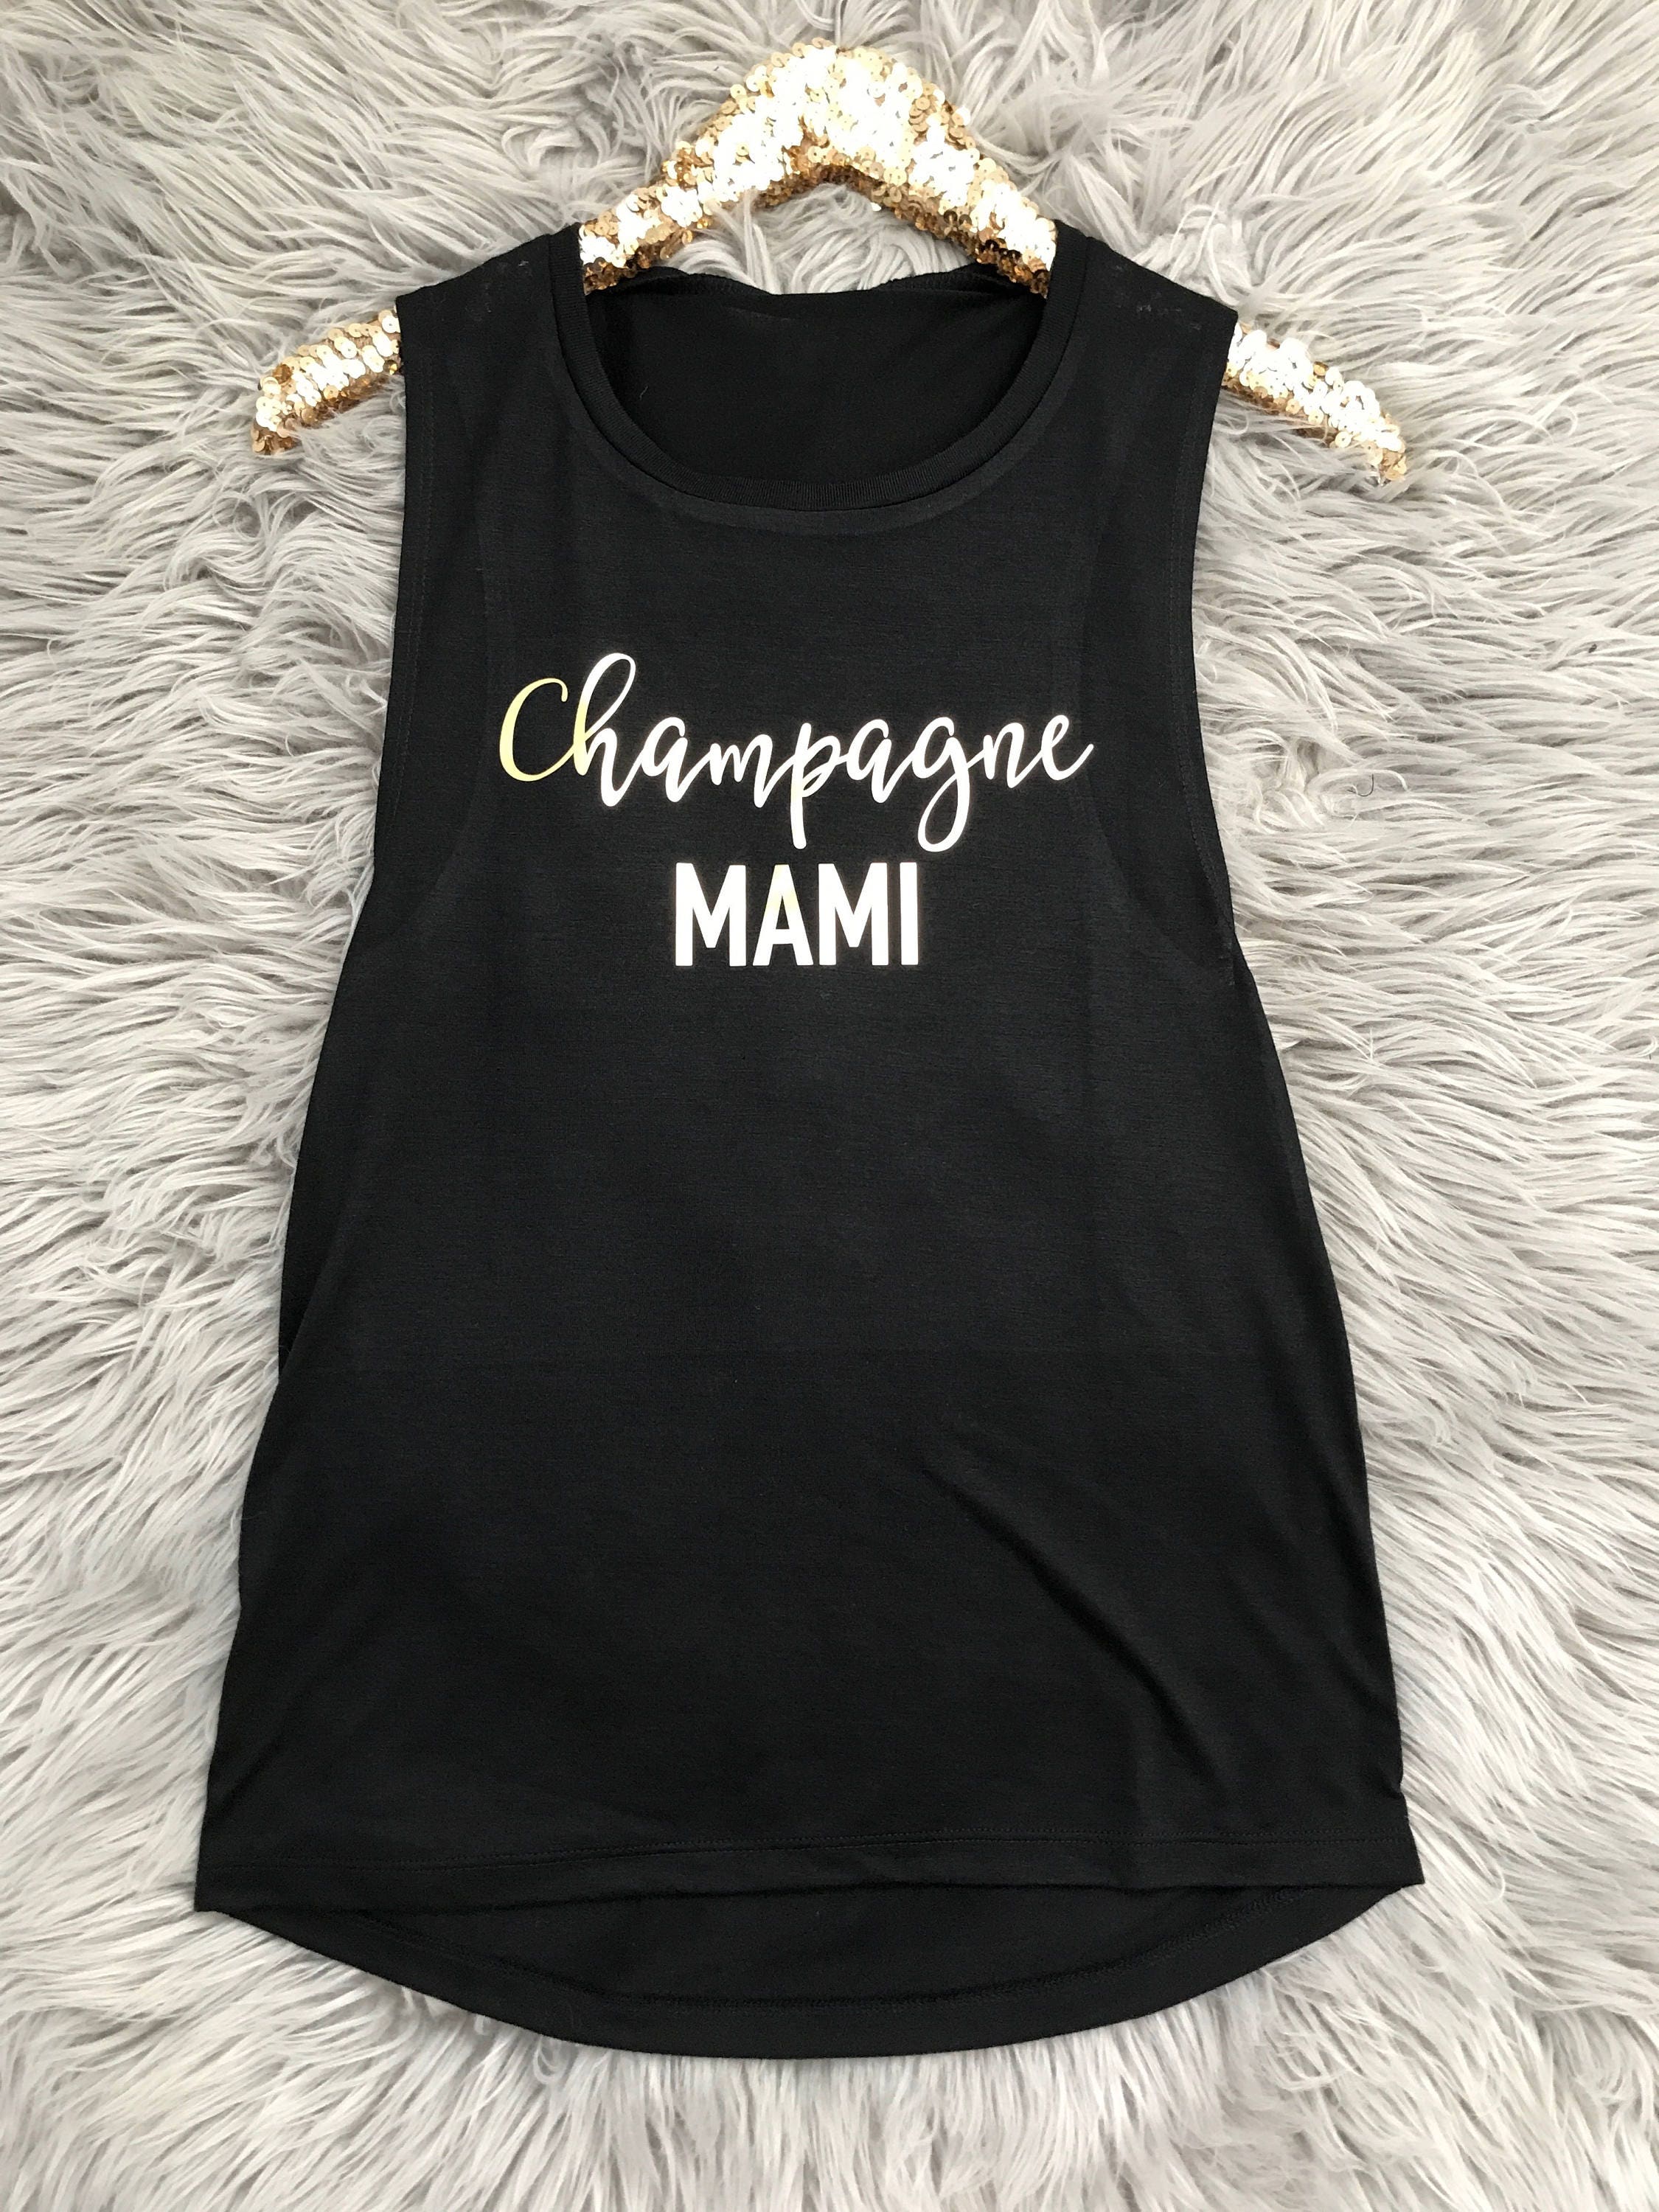 Bridal Party Shirts Champagne Mami Flowy Muscle Tank // Bachelorette Party Shirts, Bach Group Shirts, Bride Shirts, Bridal Shirts / 8803